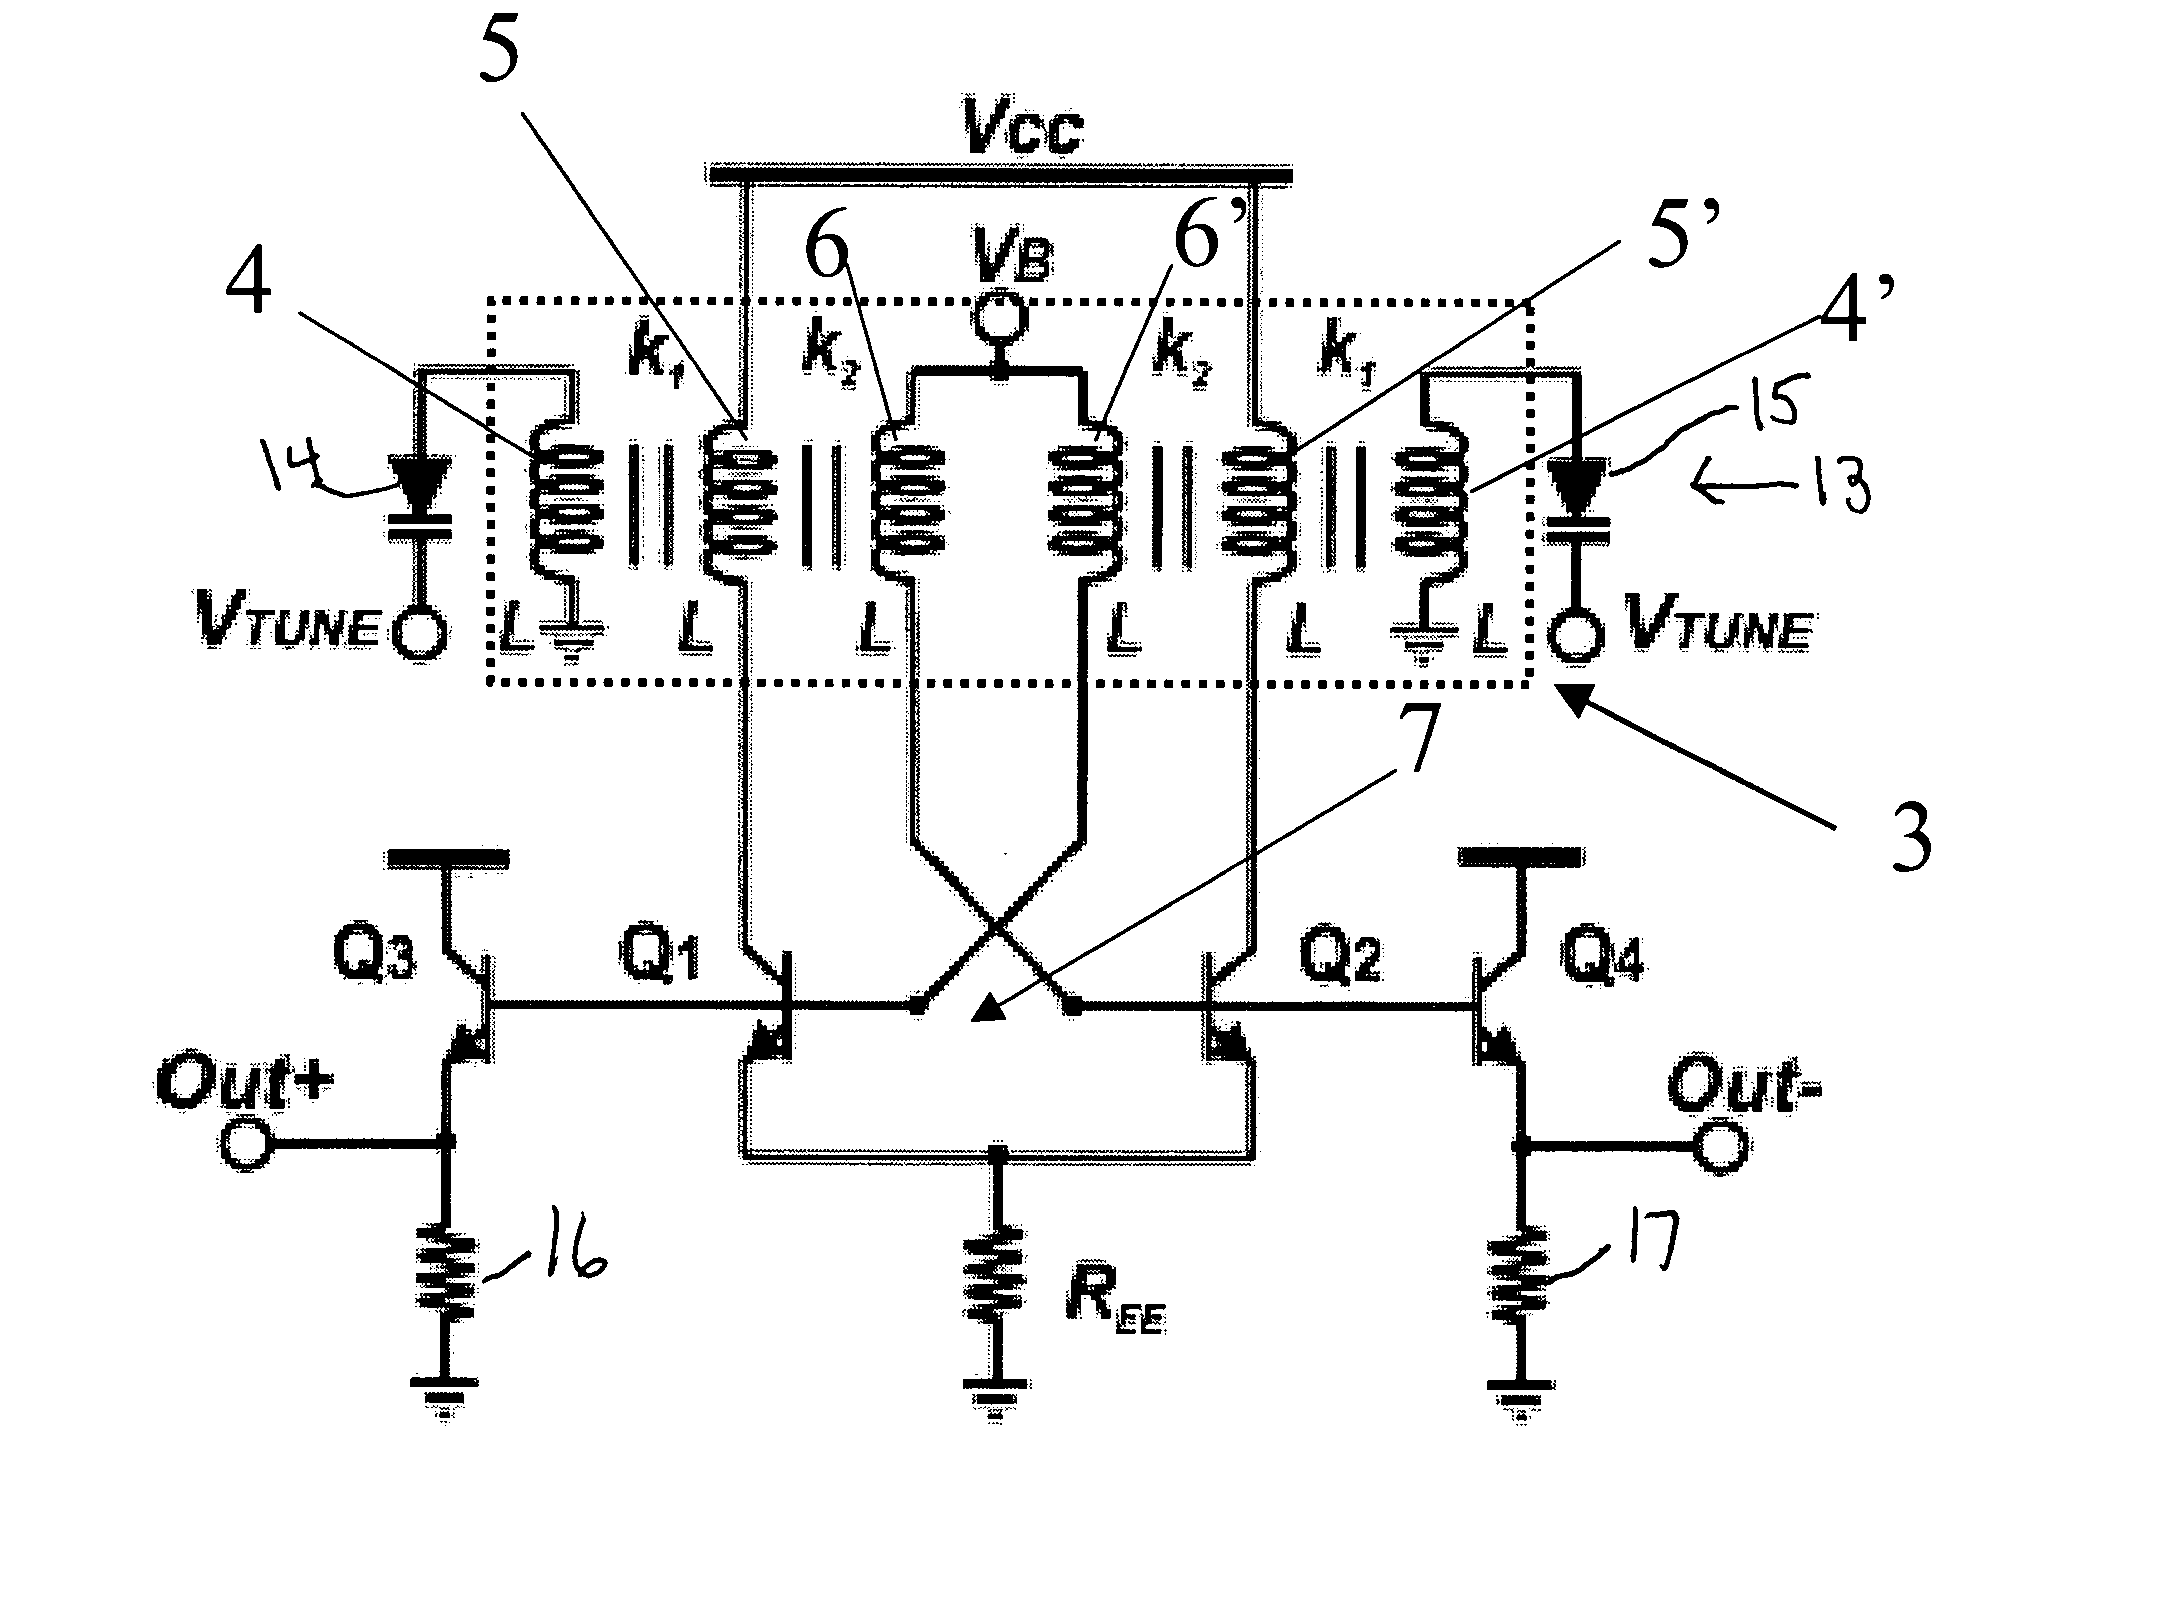 Transformer-based VCO for both phase noise and tuning range improvement in bipolar technology